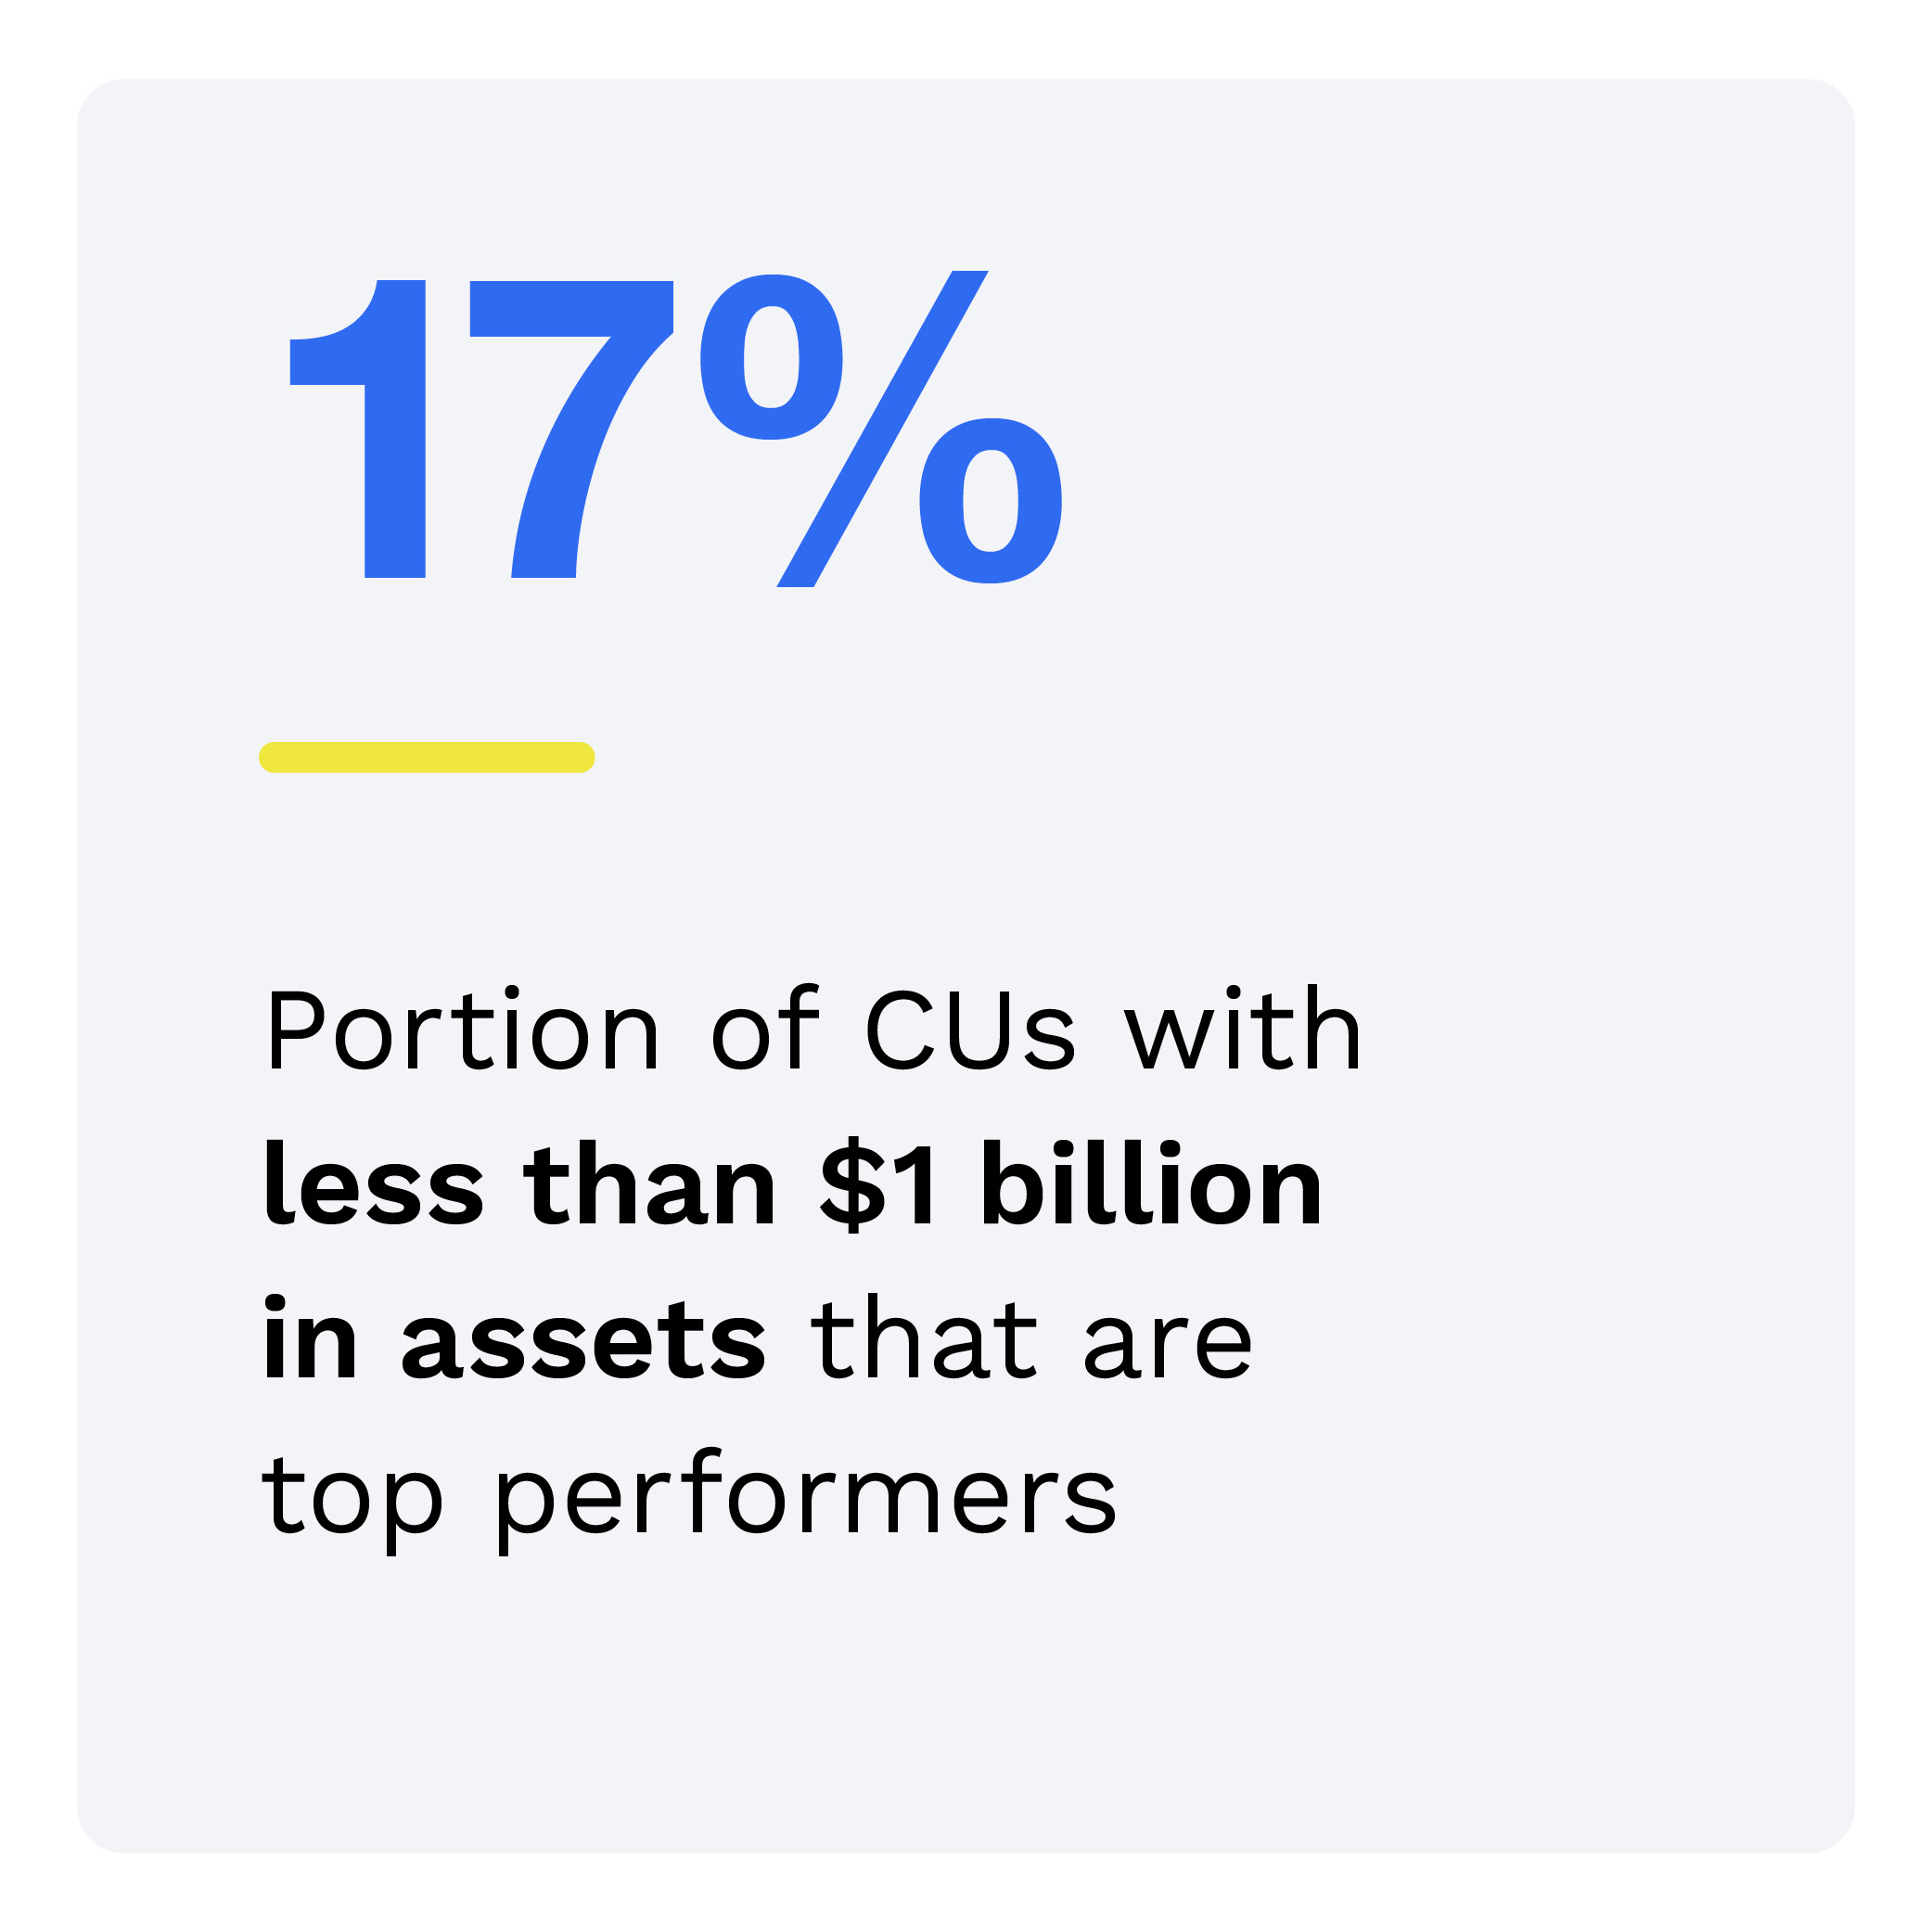 17%: Portion of CUs with less than $1 billion in assets that are top performers